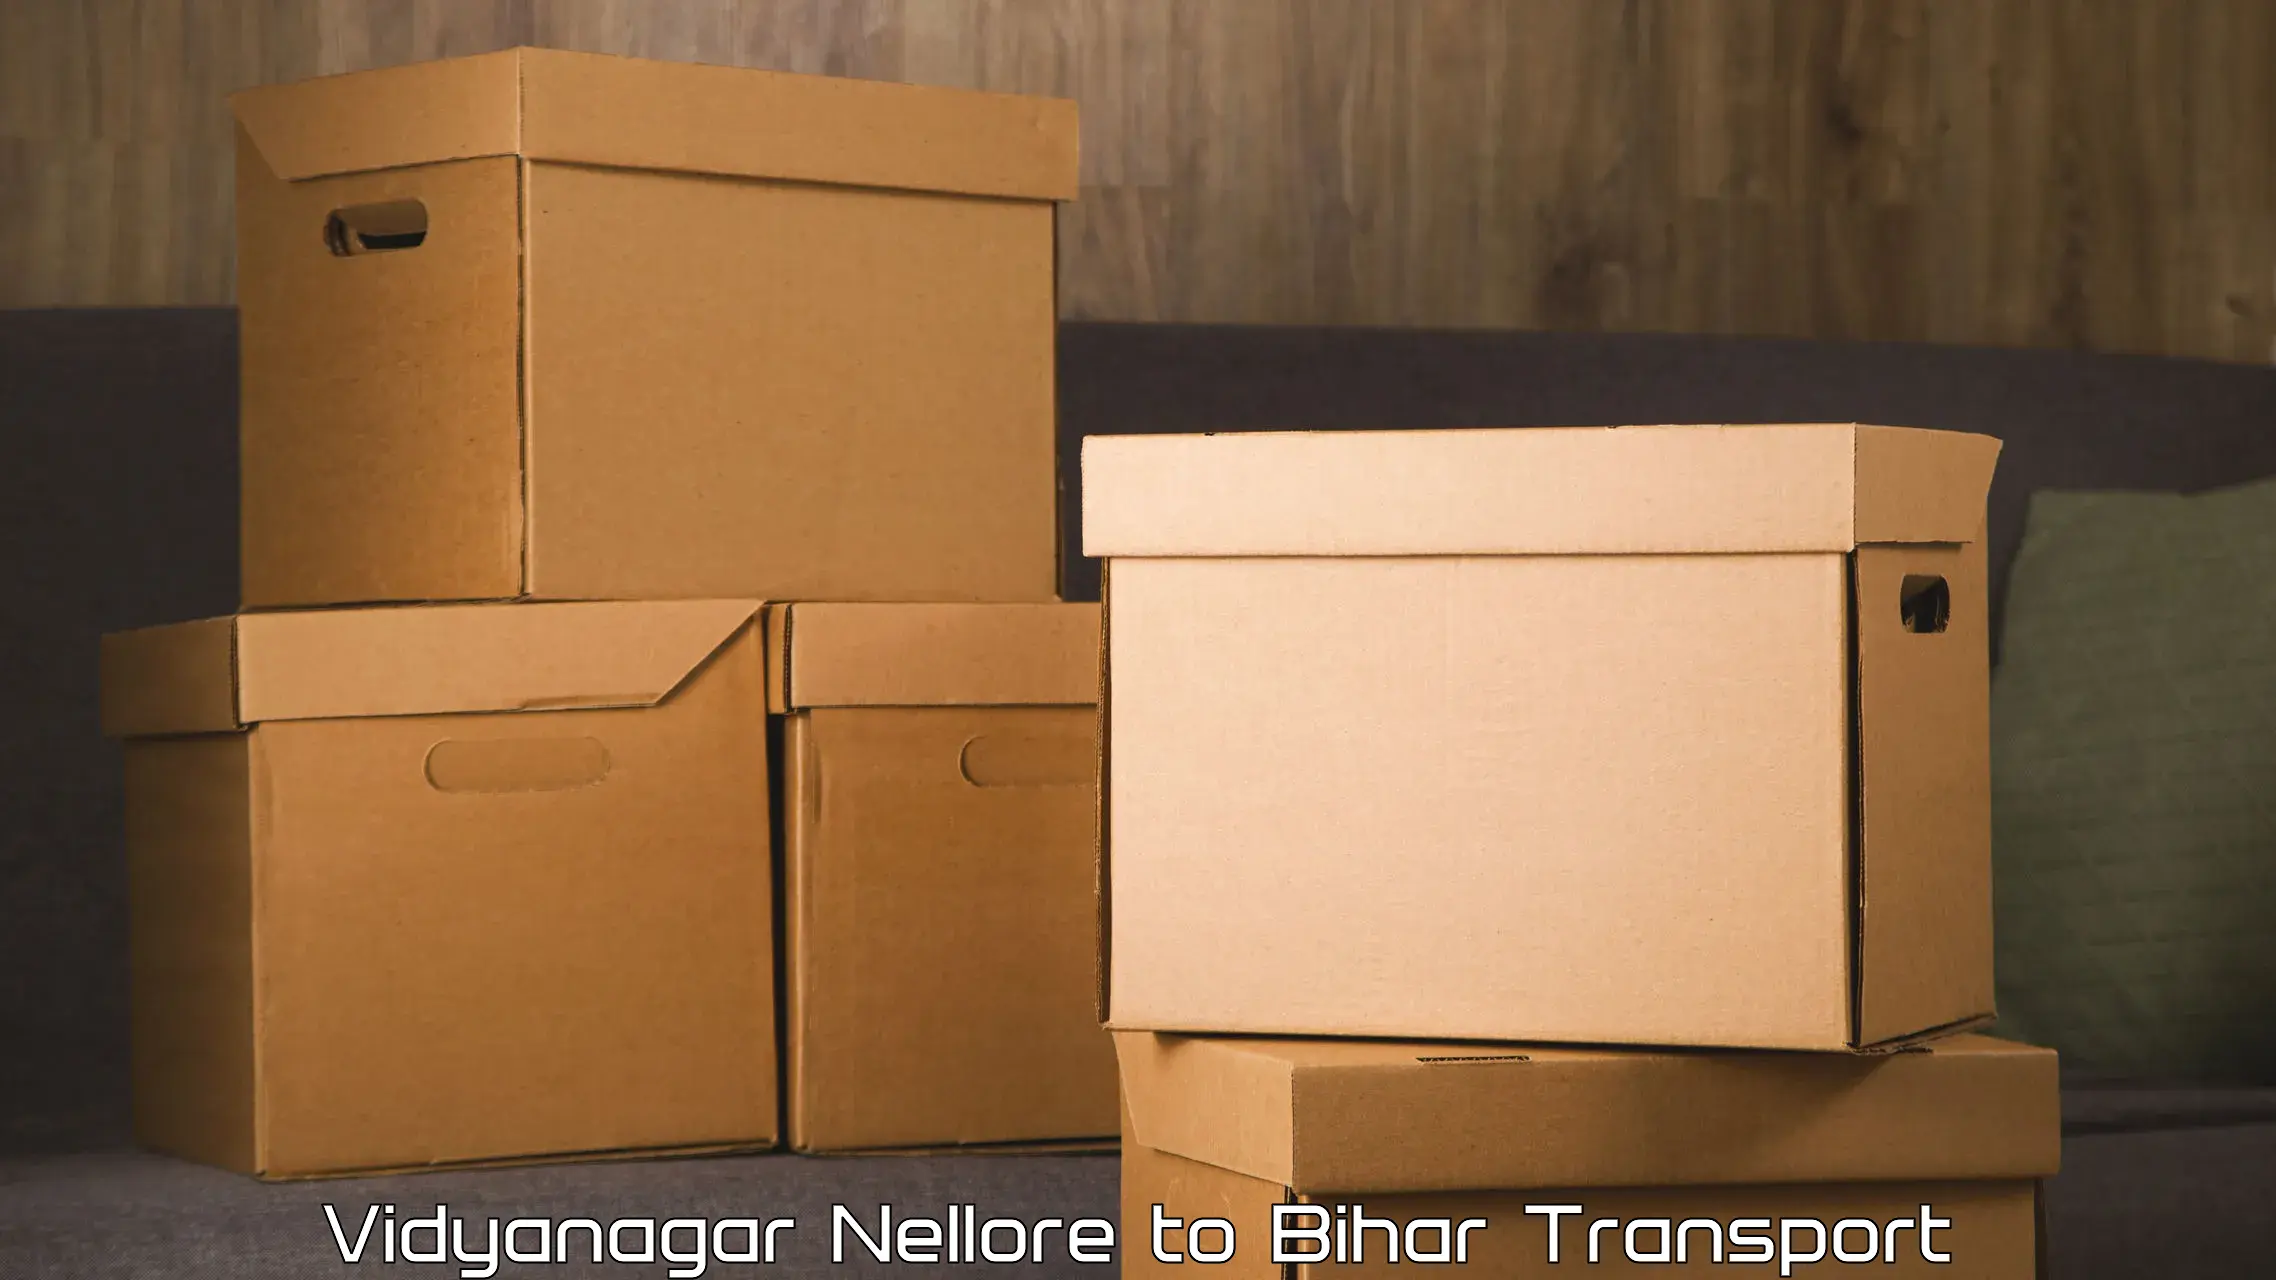 Package delivery services Vidyanagar Nellore to Sangrampur